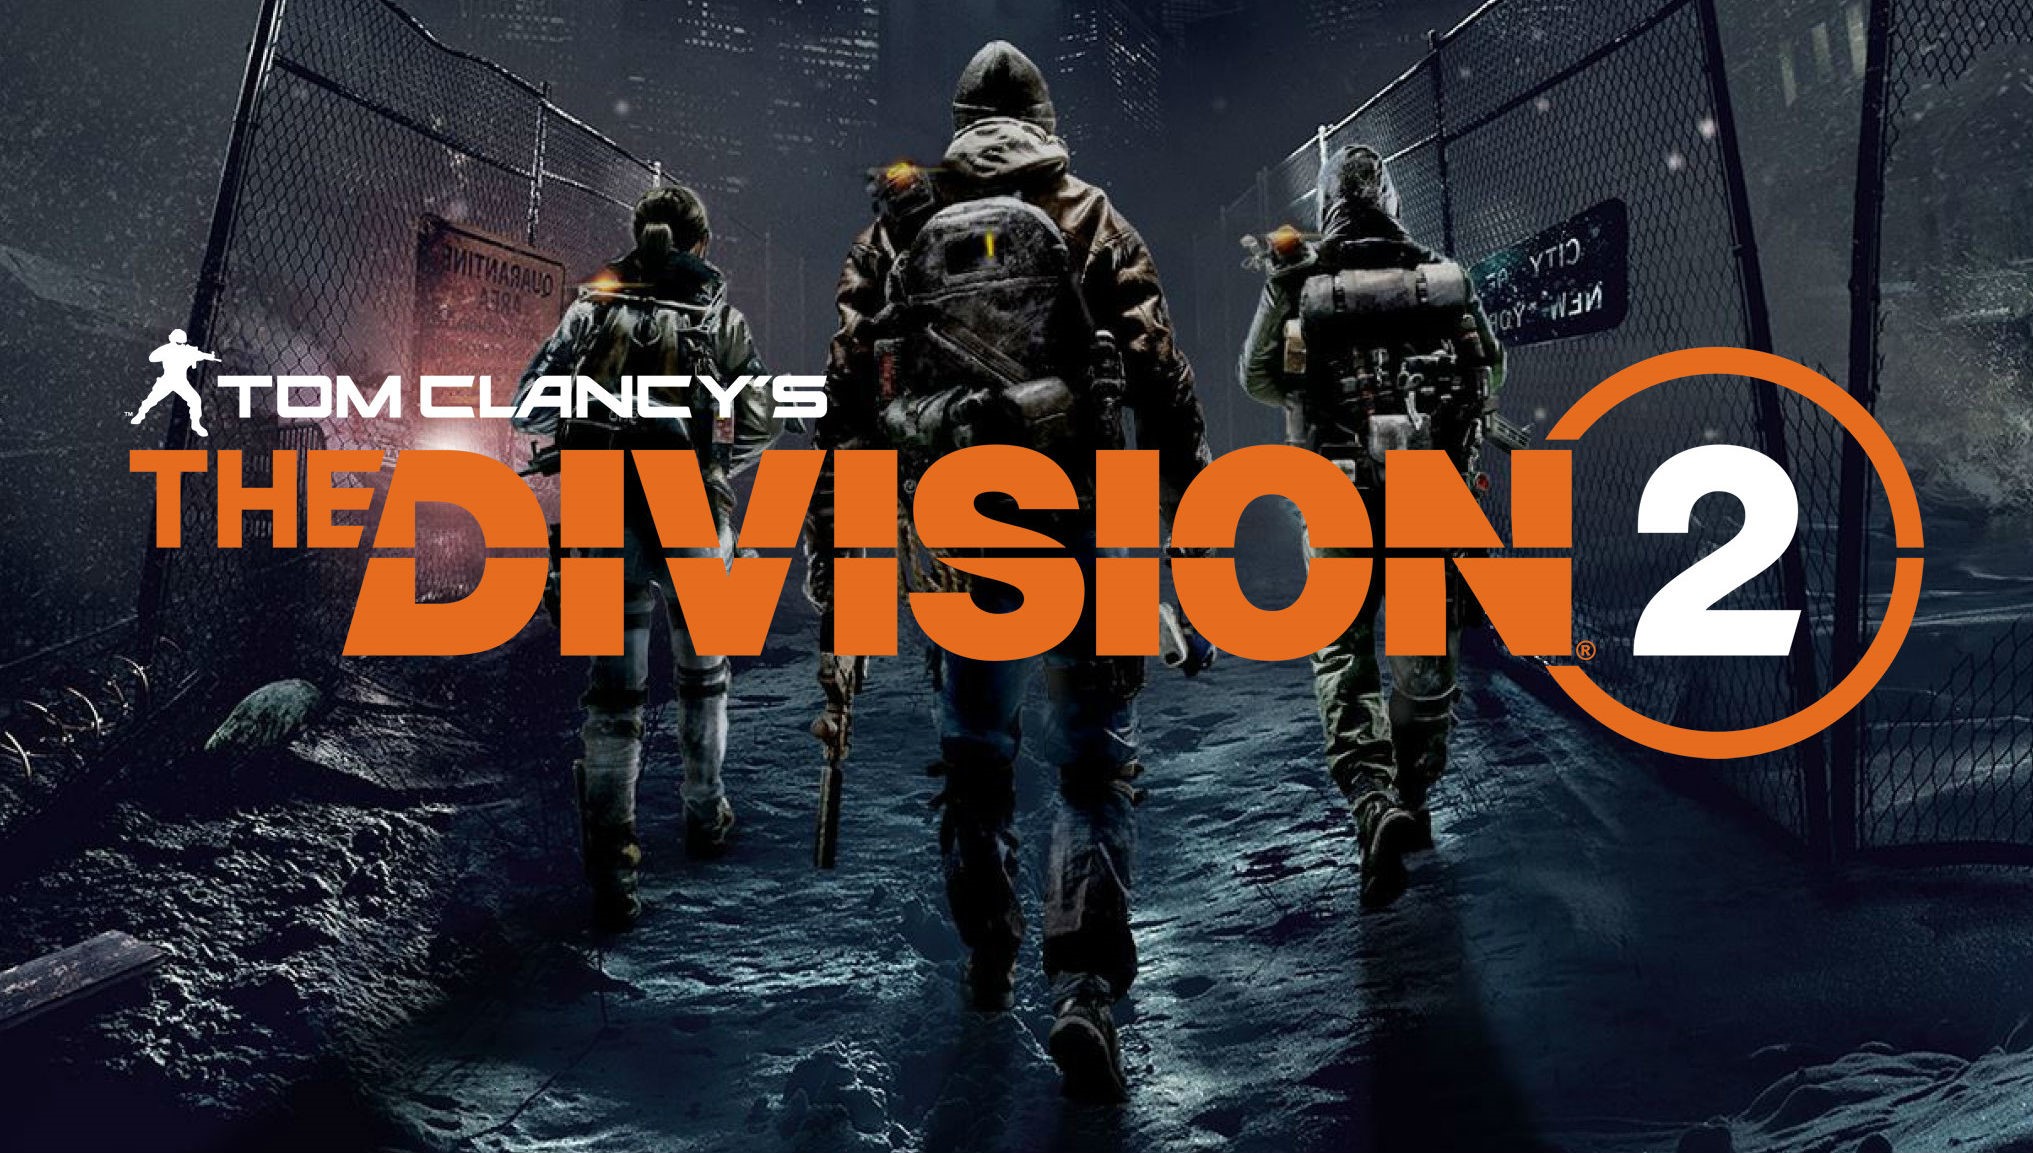 Tom Clancy’s the Division 2. Tom Clancy s the Division. Tom Clancy's the Division 2 стрим. Tom Clancy’s the Division 2 обложка. Tom clancy s ultimate edition